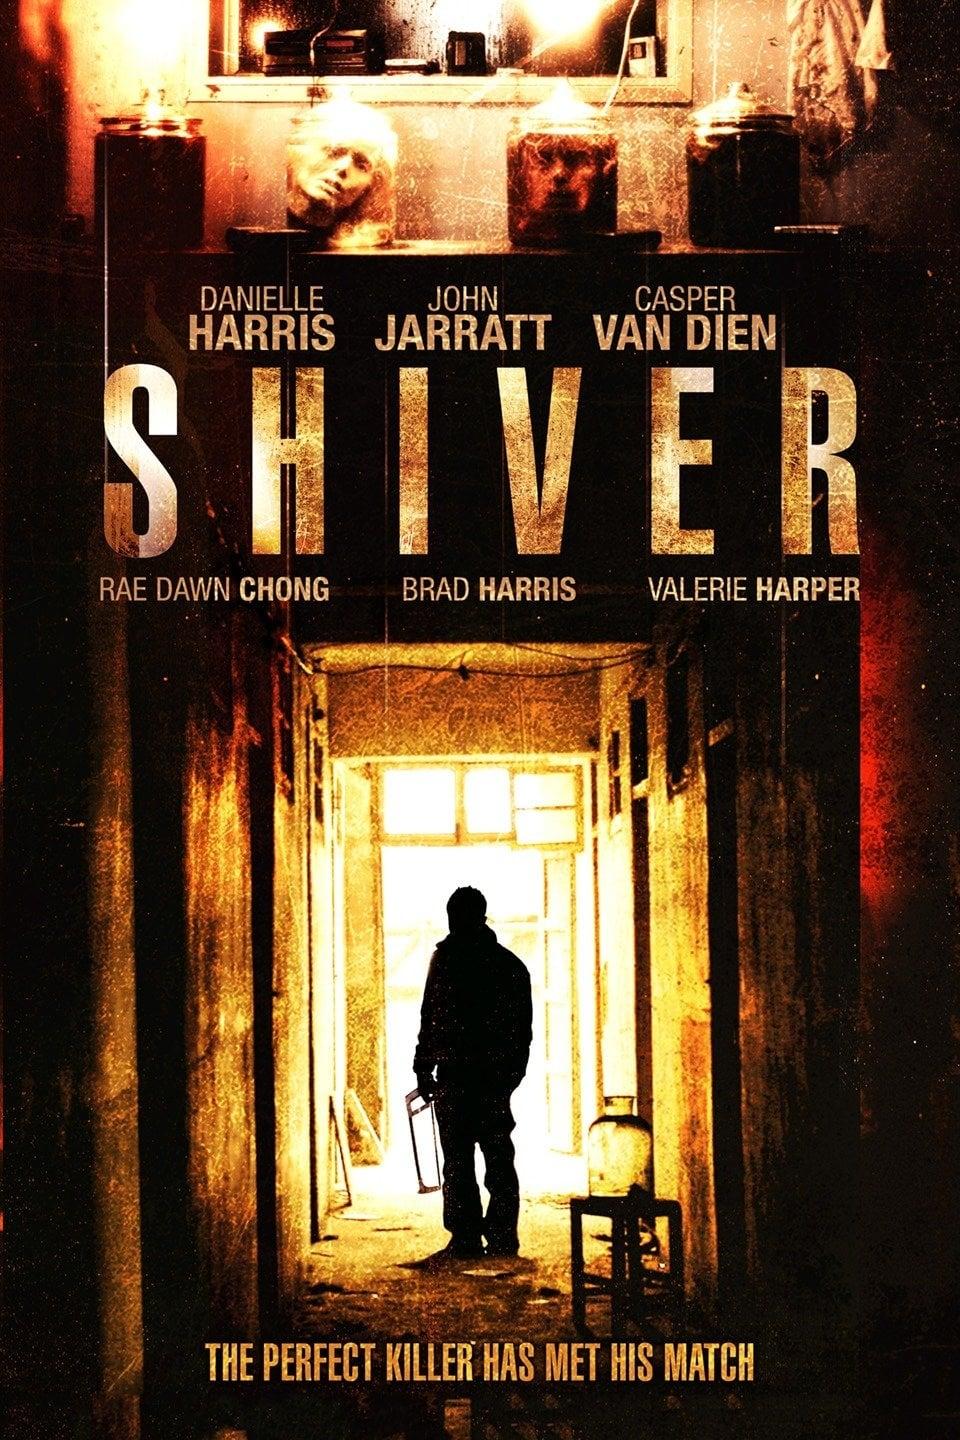 Shiver poster